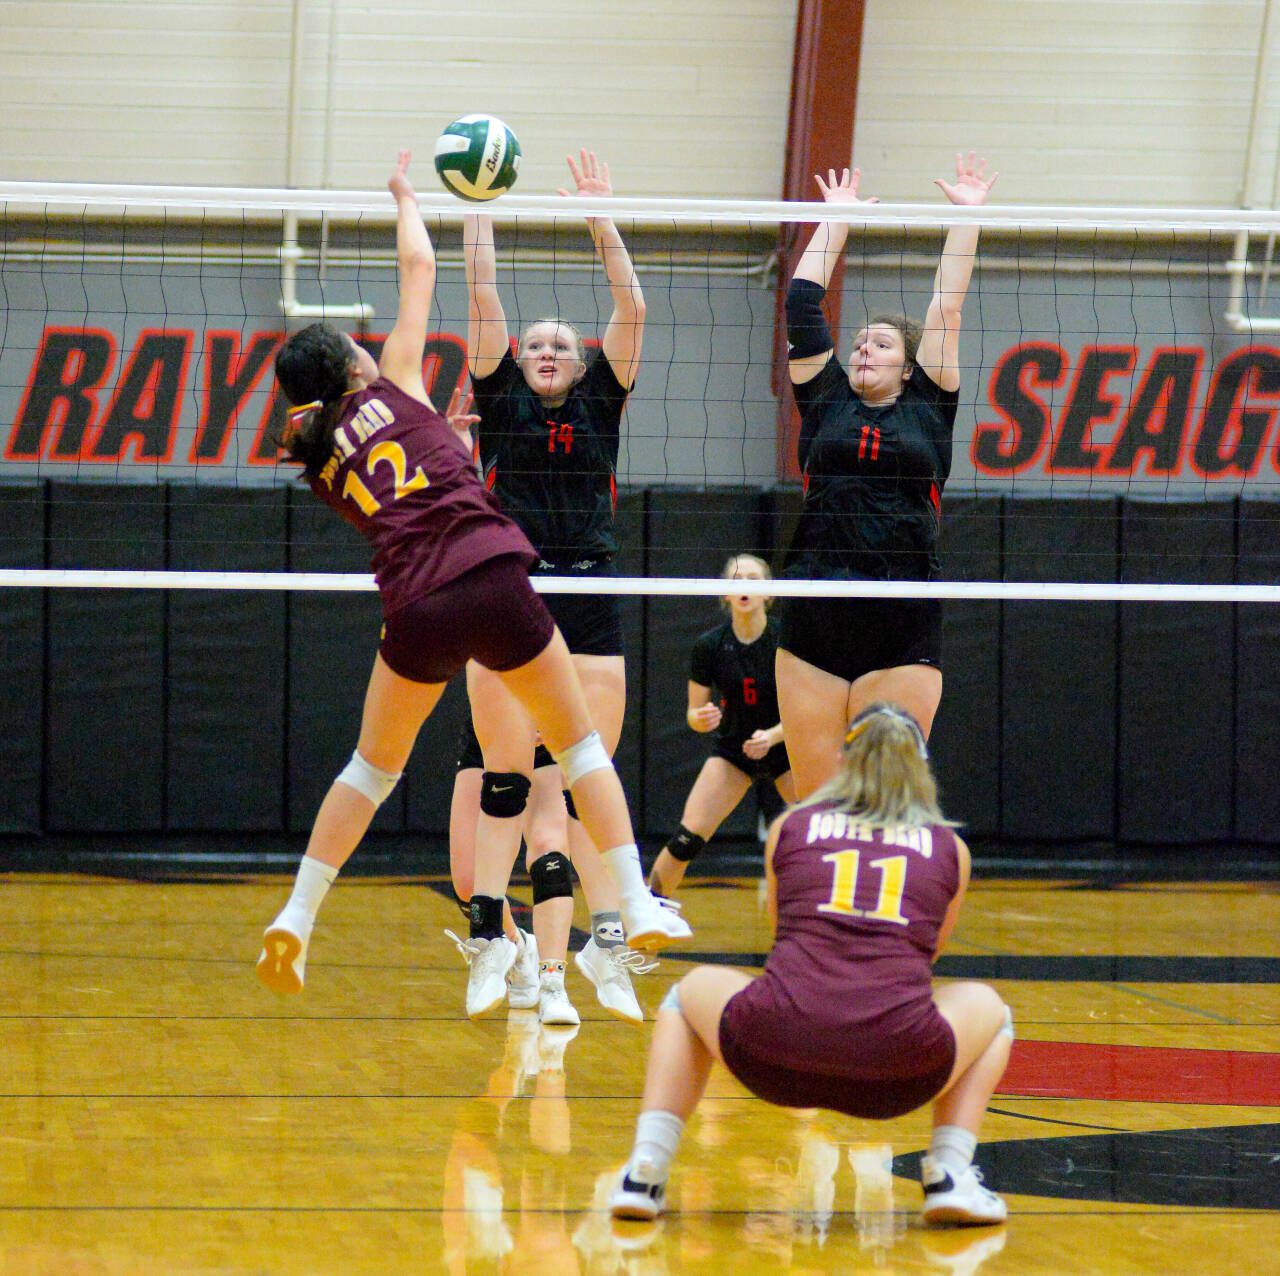 RYAN SPARKS | THE DAILY WORLD Raymond’s Grace Busenius (14) and Caton Swogger (11) attempt to block the shot of South Bend outside hitter Raydynn Morley during Tuesday’s game in Raymond.